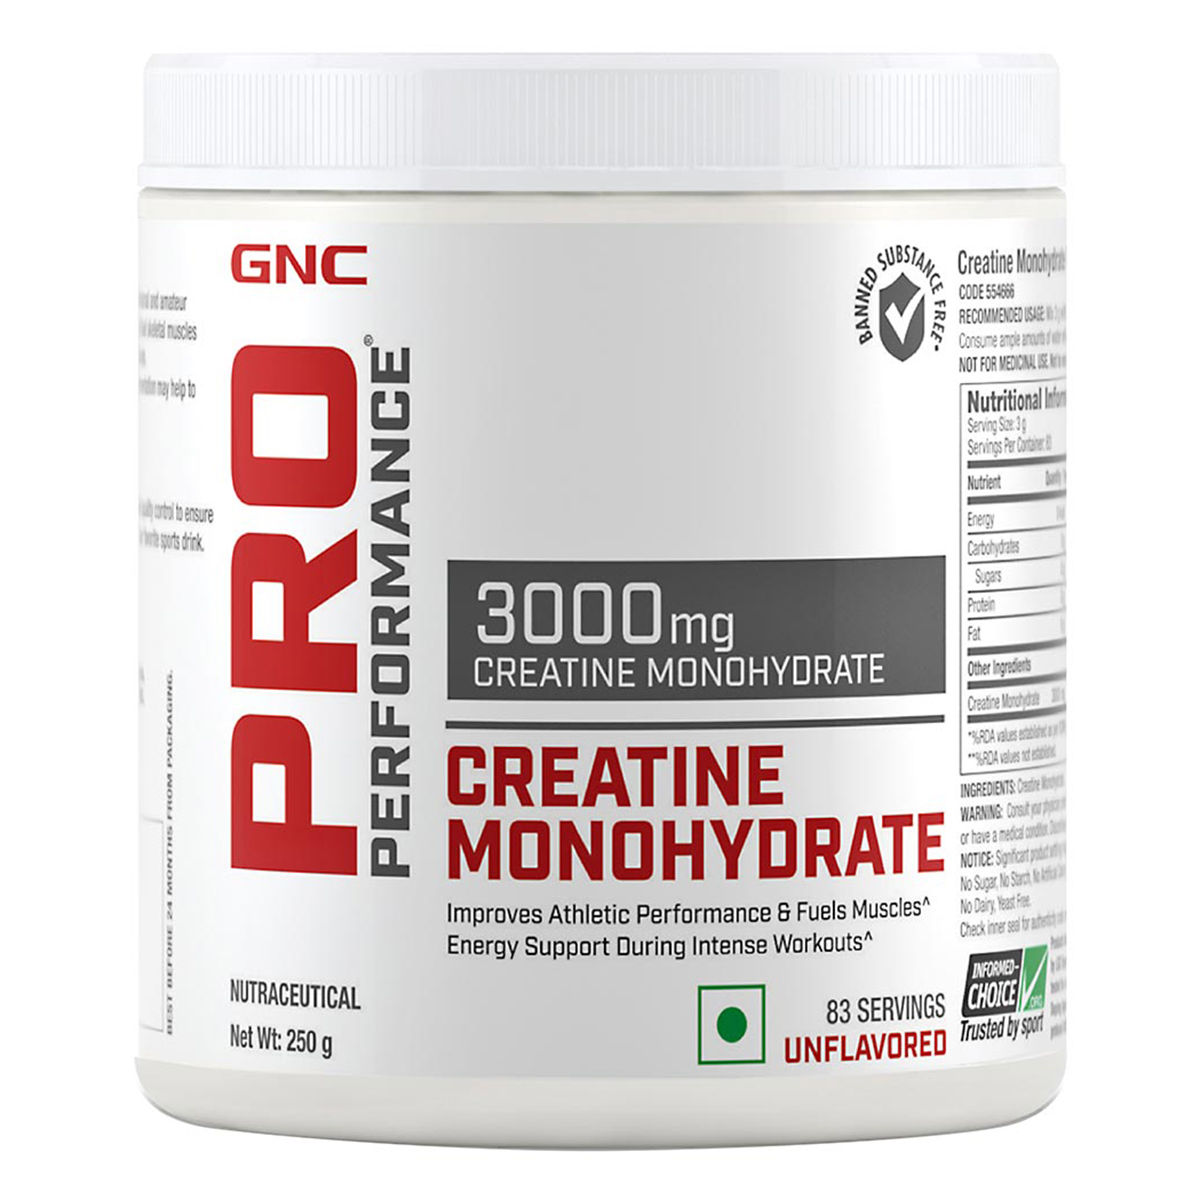 Buy GNC PRO Performance Creatine Monohydrate 3000 mg Unflavored Powder, 250 gm Online